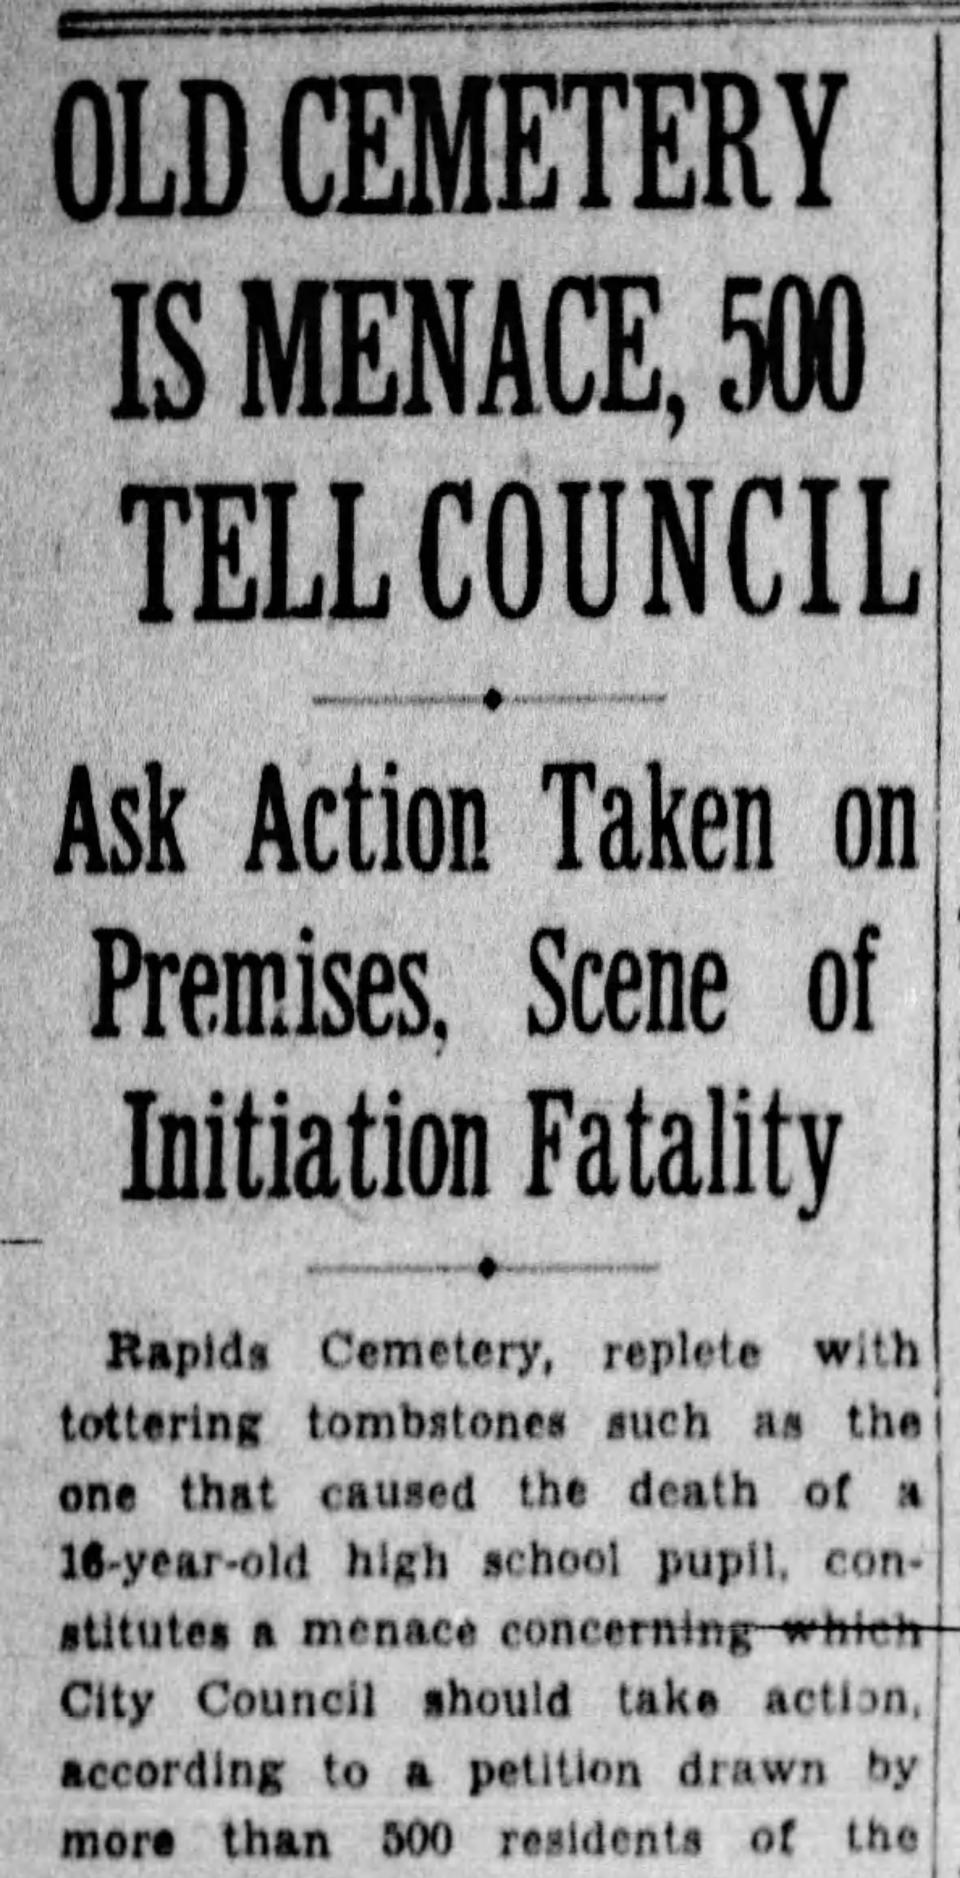 A Democrat and Chronicle clipping regarding Rapids Cemetery from April 7, 1934.